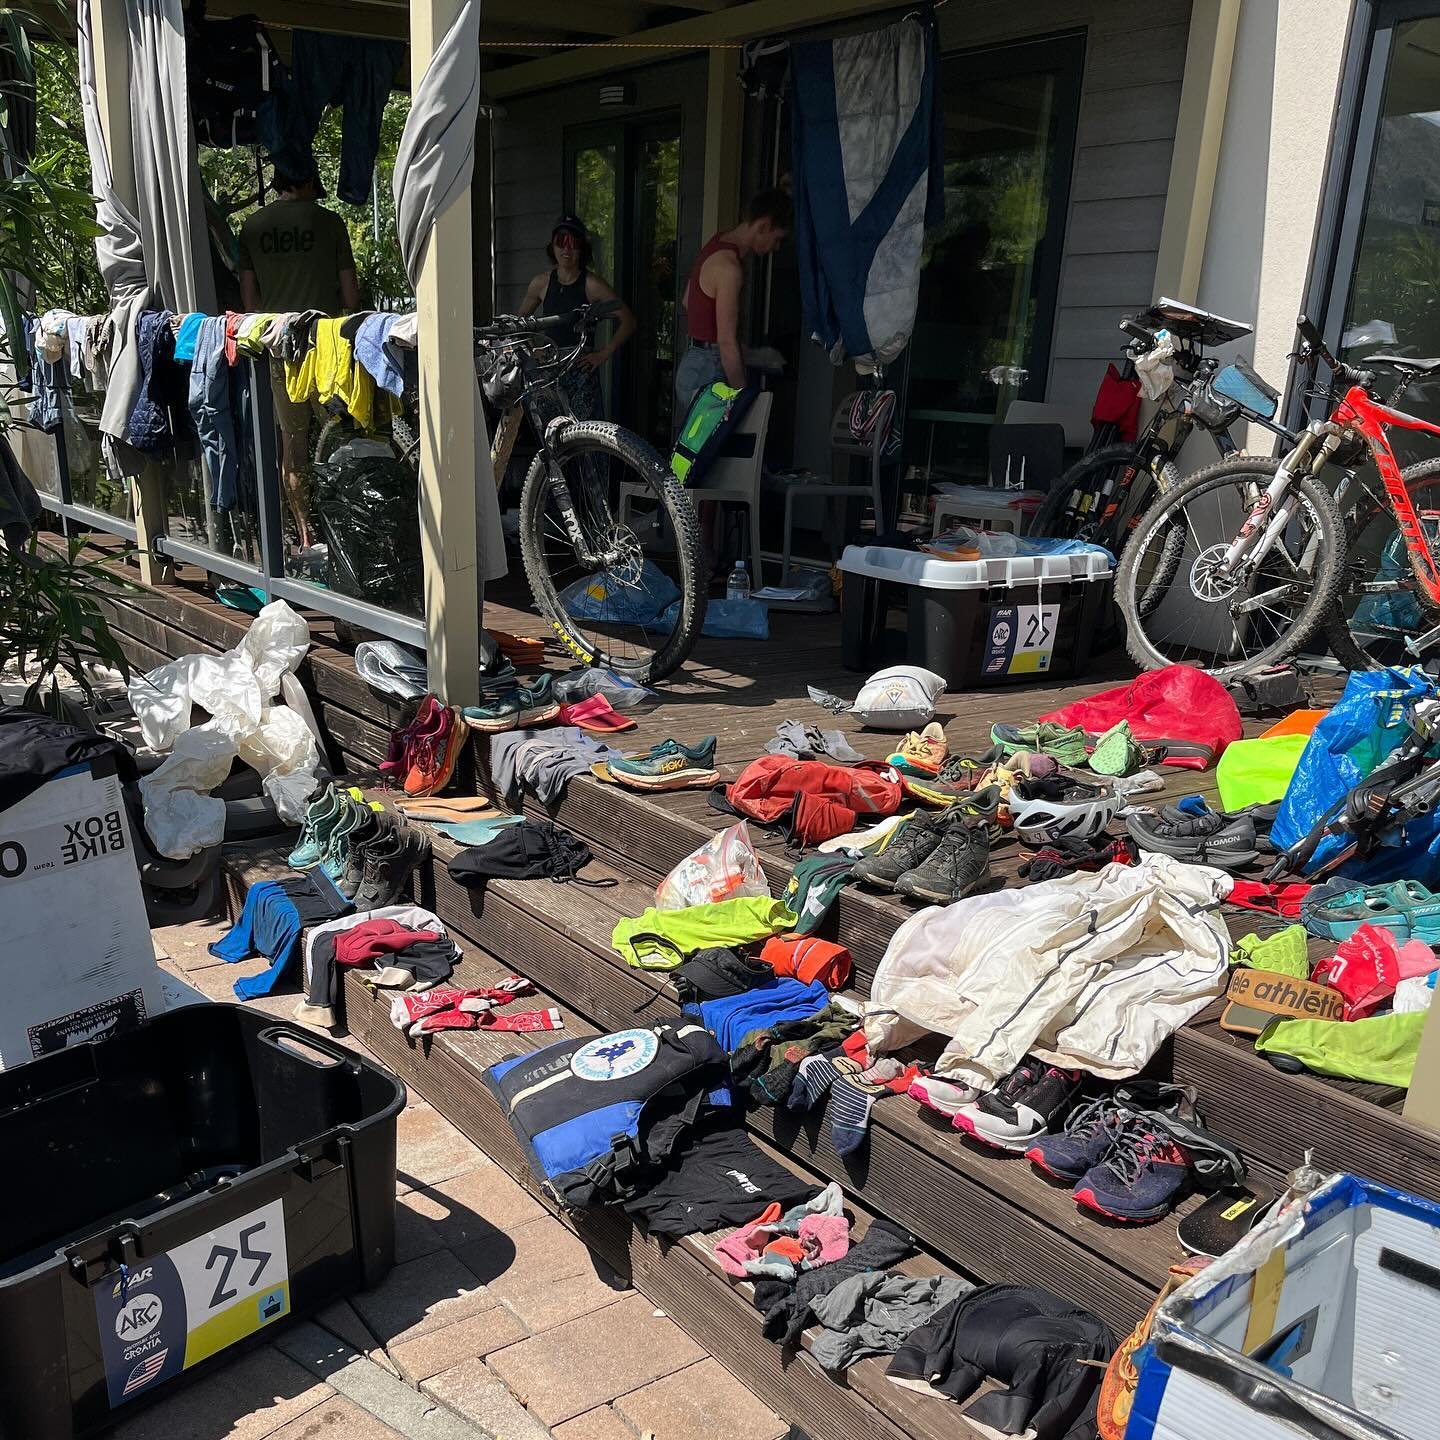 And now the real fun begins.😱 I think the hardest part of Adventure Racing is the gear prep then the gear clean up. Once you&rsquo;re on the start and in the race it&rsquo;s all easy, right?🤔 
This was our deck today. And, I found Duff beer here in